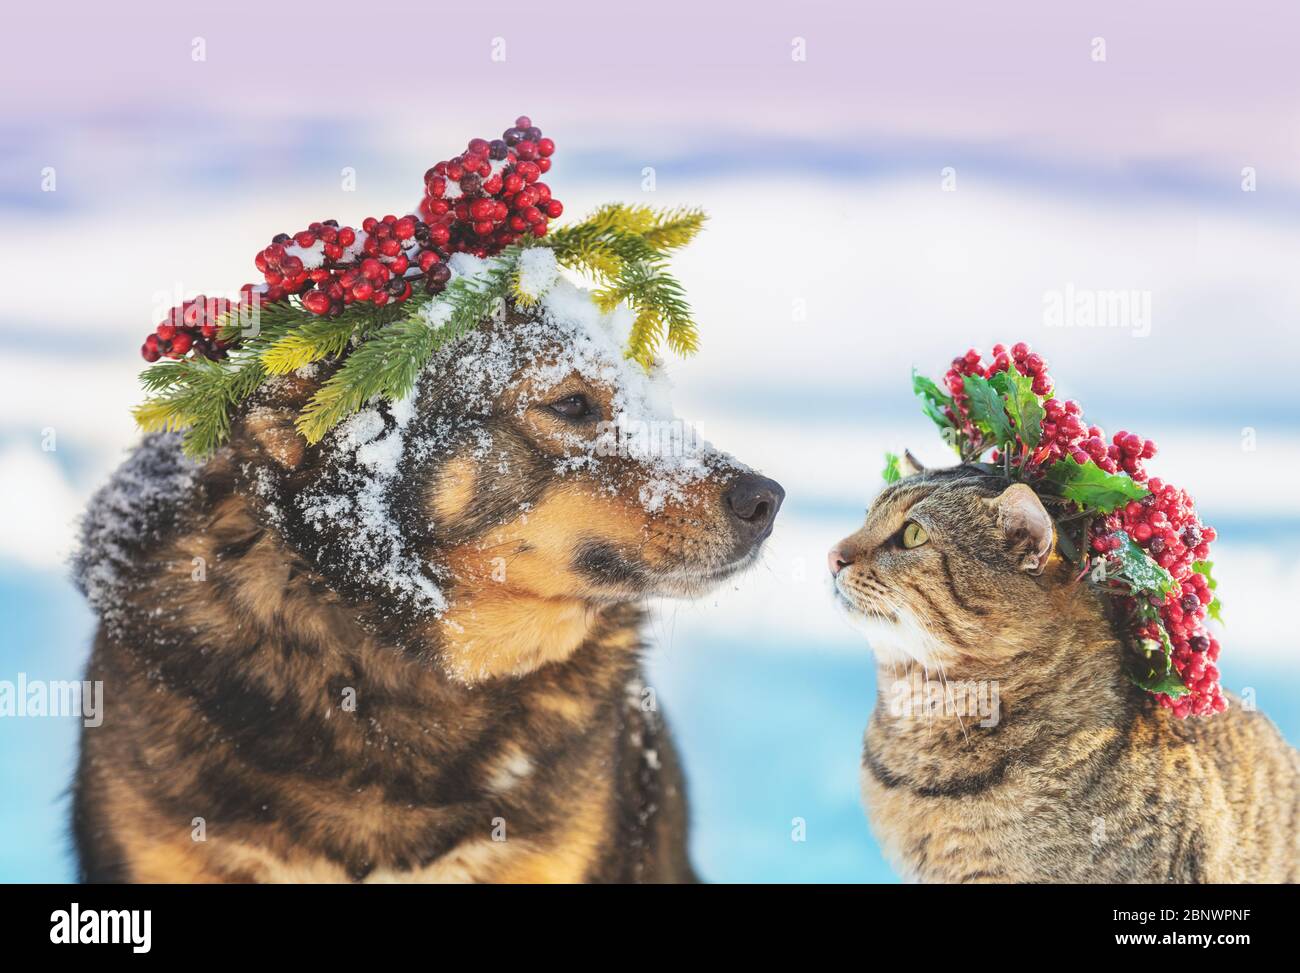 Funny dog and cat with Christmas wreath sitting together outdoors on the snow in winter. Christmas scene Stock Photo